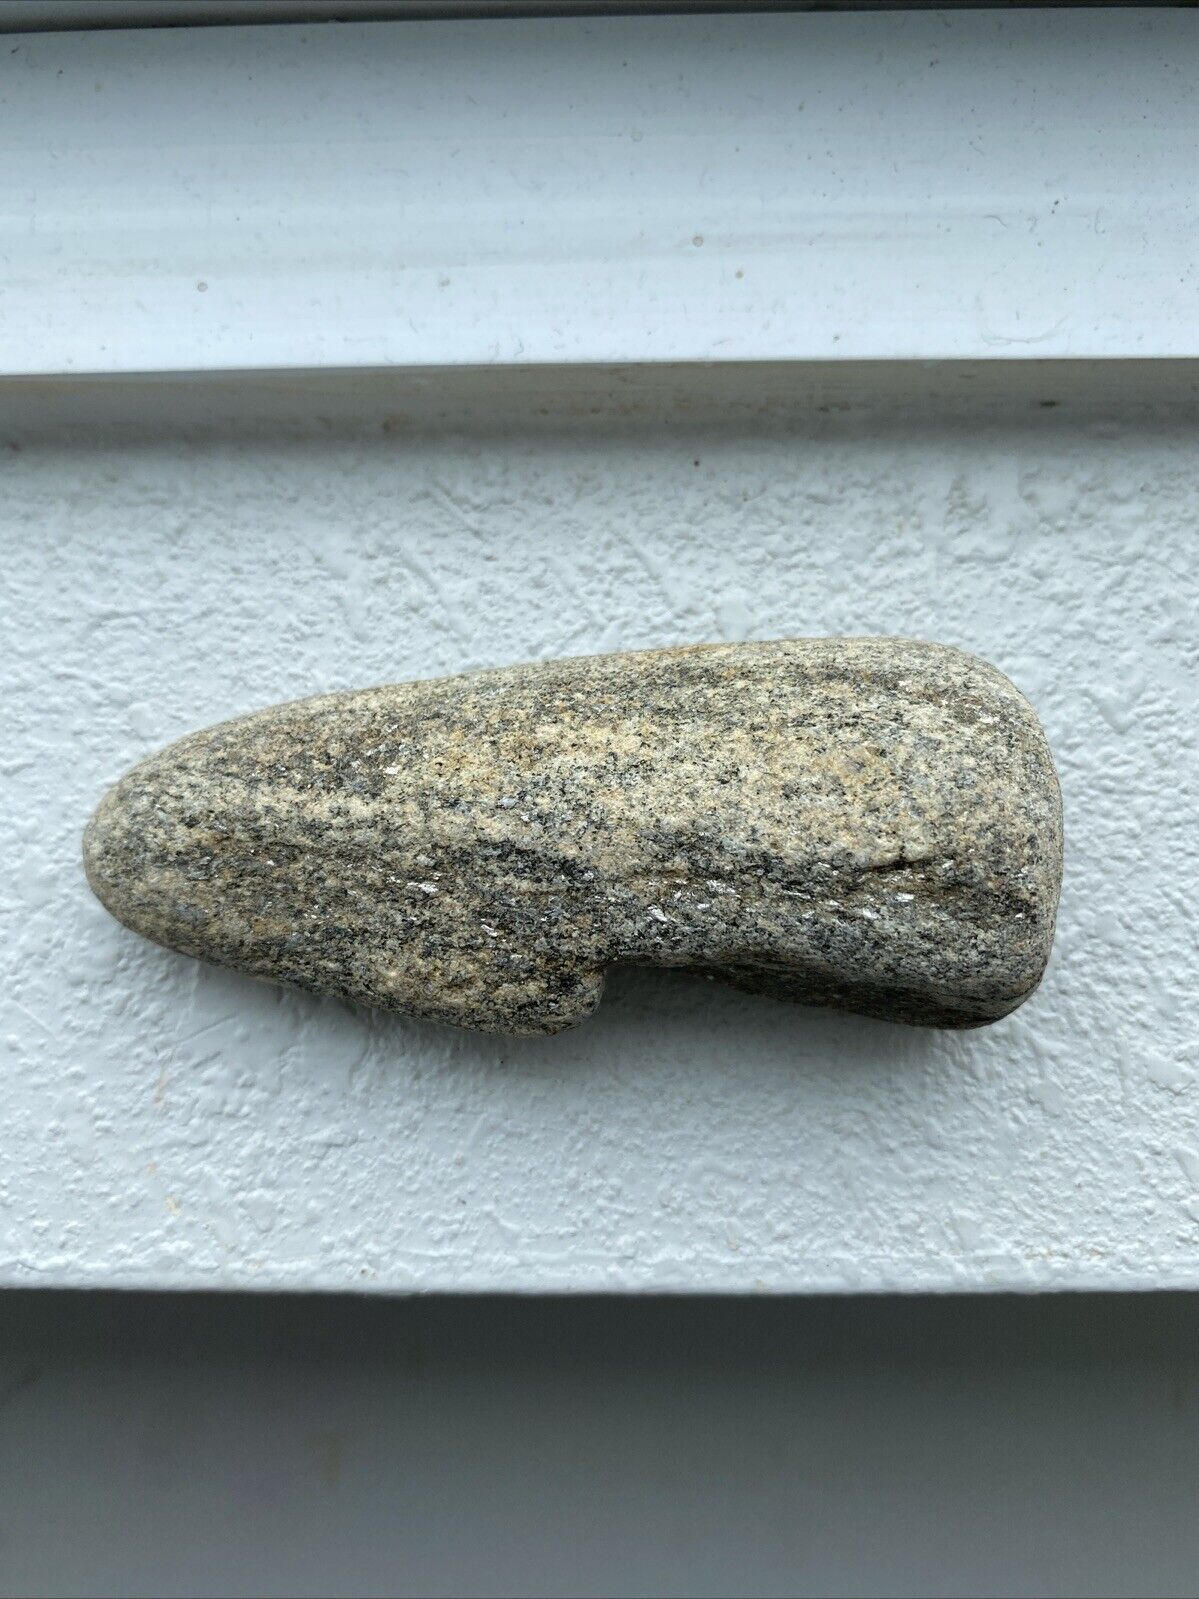 Native American Indian Grooved Stone Tomahawk/Axe Head - Logan County, Illinois